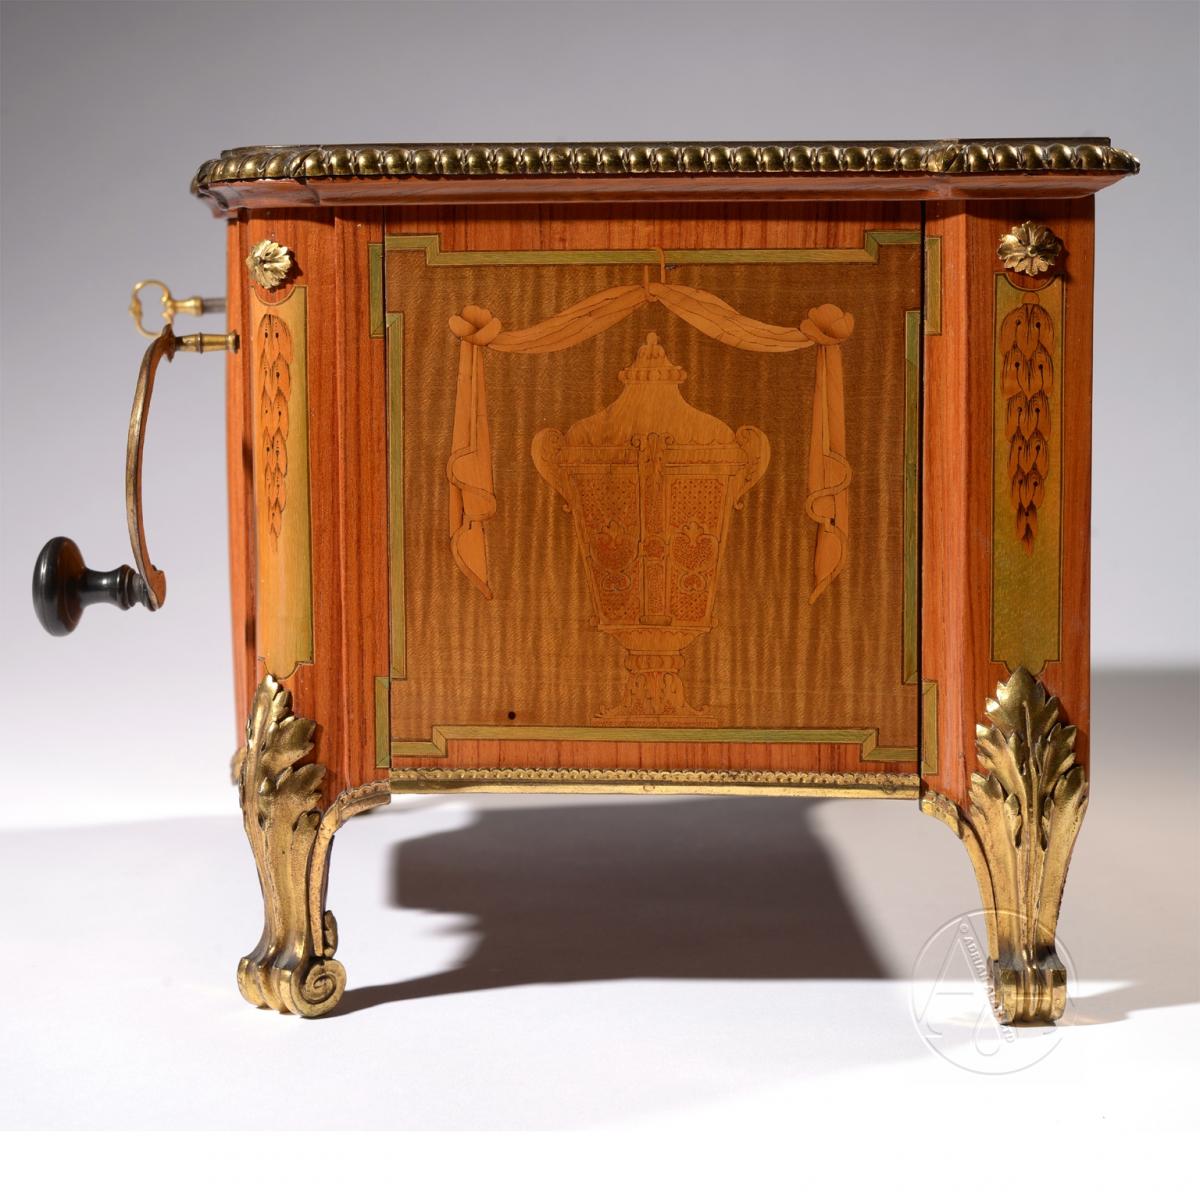 A Very Rare Louis XVI Period Serinette or Bird Organ Music Box In The Form Of A Transitional Style Gilt-Bronze Mounted and Marquetry Inlaid Miniature Commode In The Manner of Gilbert,  By Richard, Paris